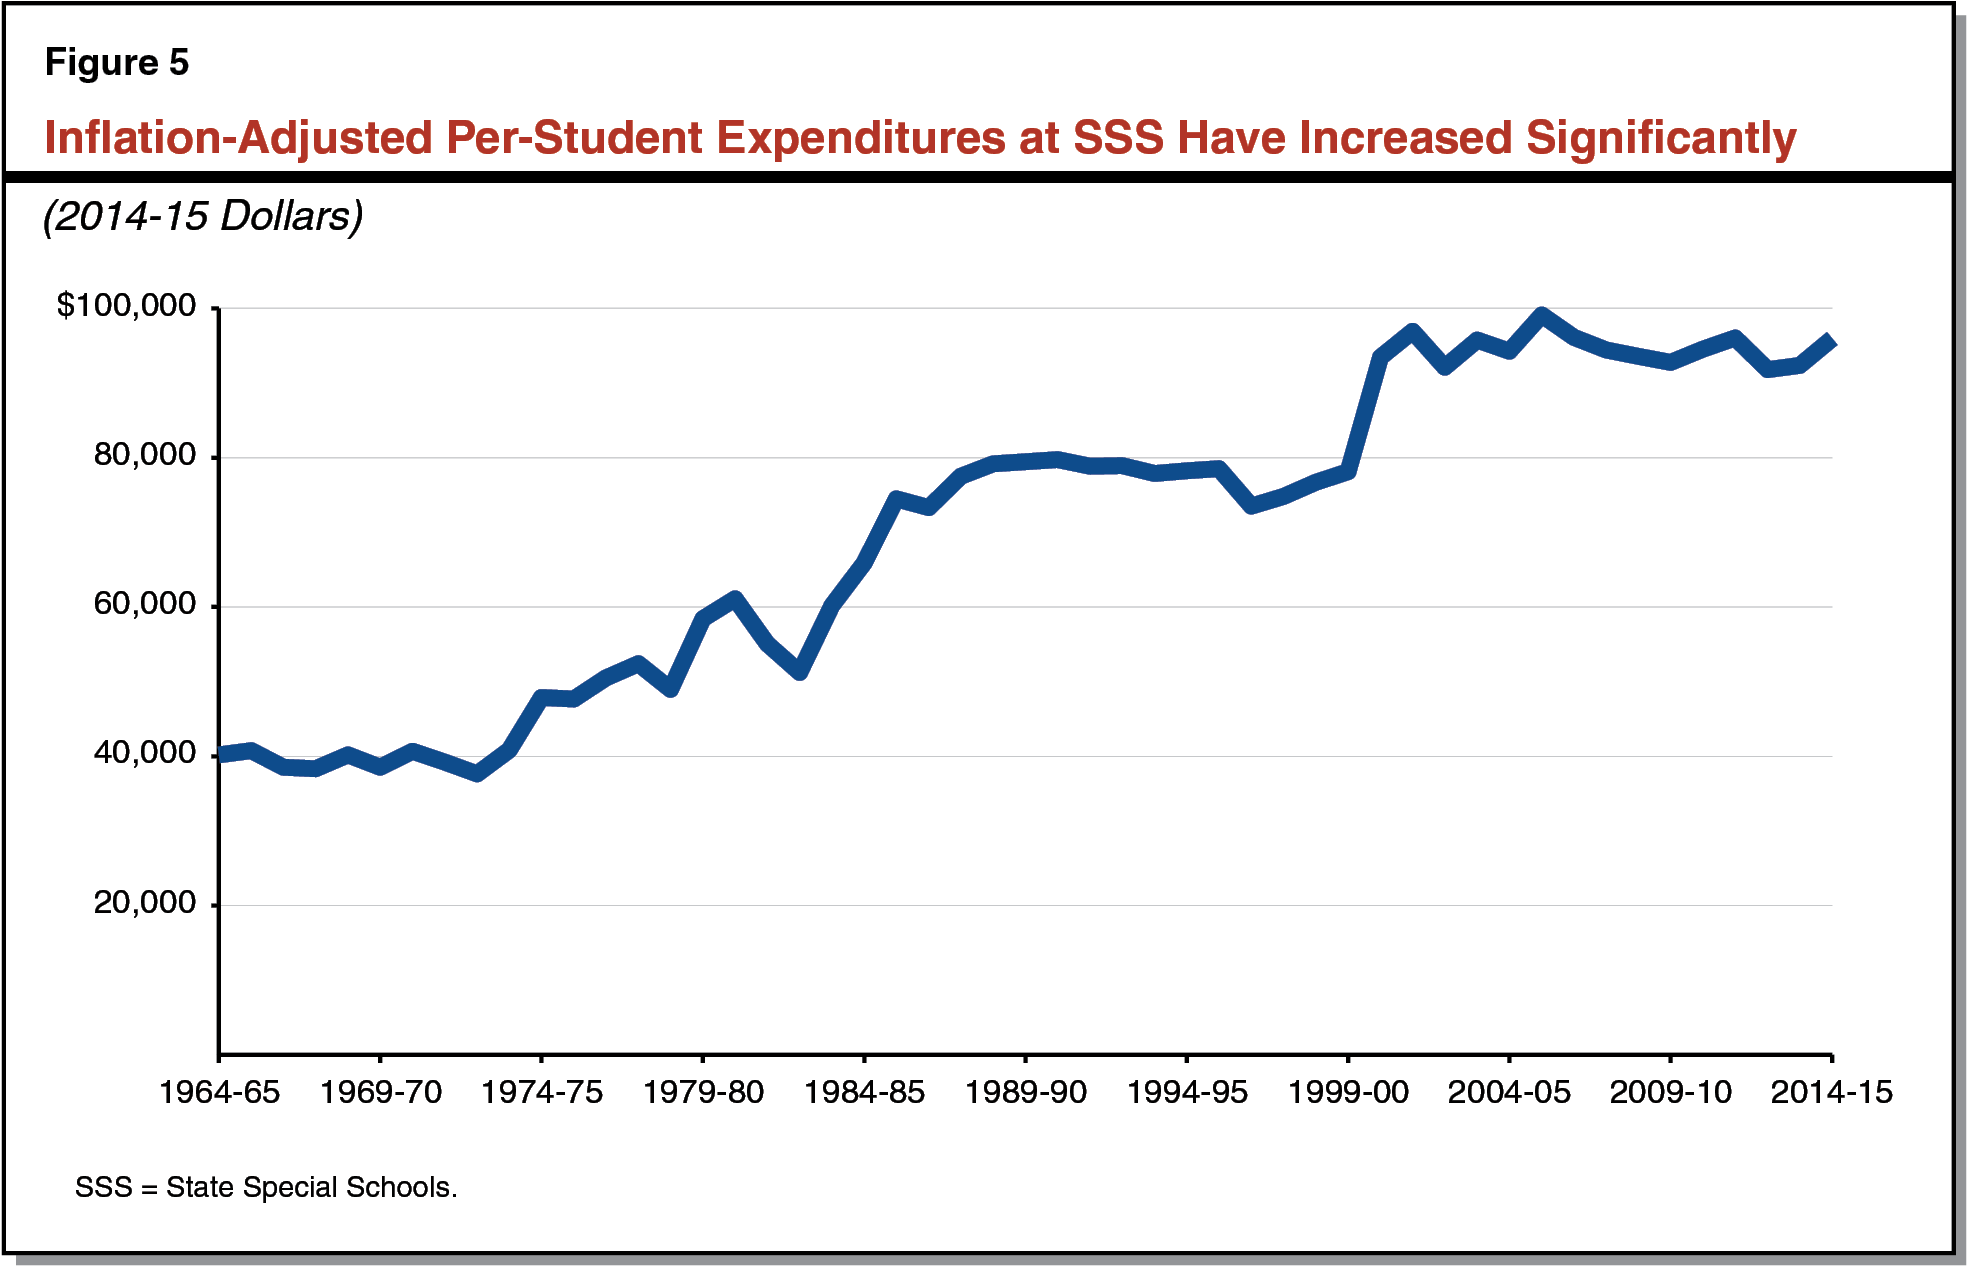 Figure 5 - Inflation-Adjusted Per-Student Expenditures at SSS Have Increased Significantly